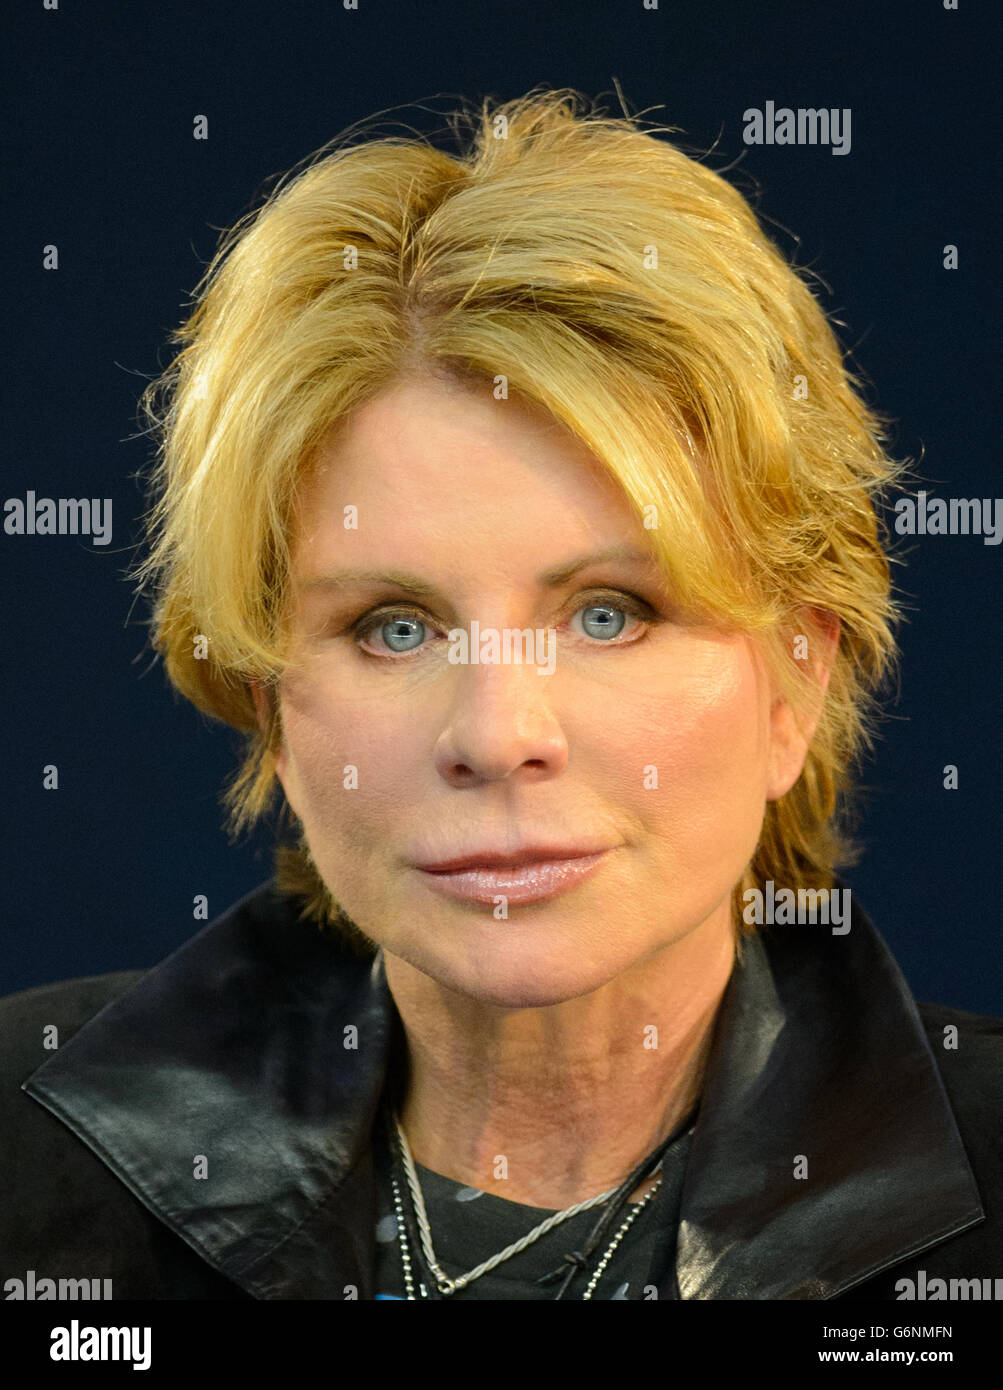 https://c8.alamy.com/comp/G6NMFN/patricia-cornwell-attending-meet-the-author-patricia-cornwell-at-the-G6NMFN.jpg